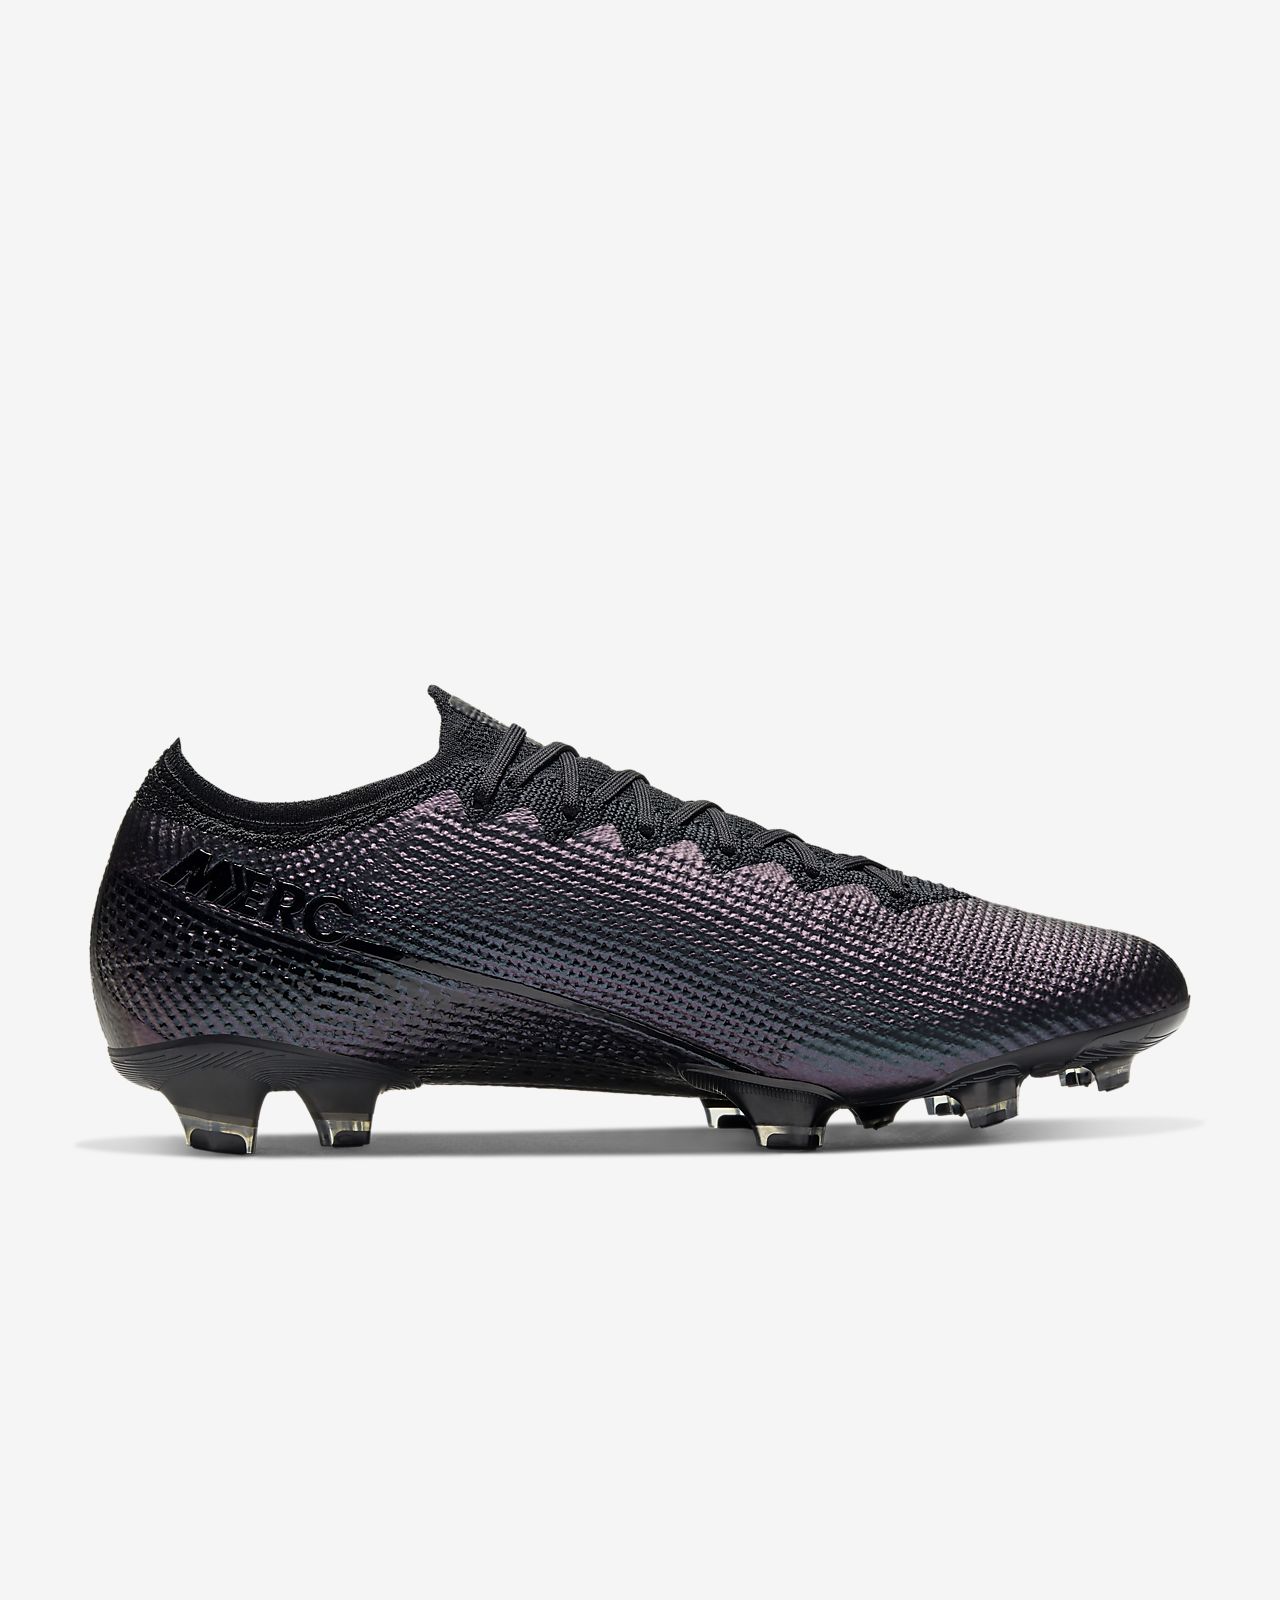 8 Reasons to NOT to Buy Nike Mercurial Superfly 7 May 2020.